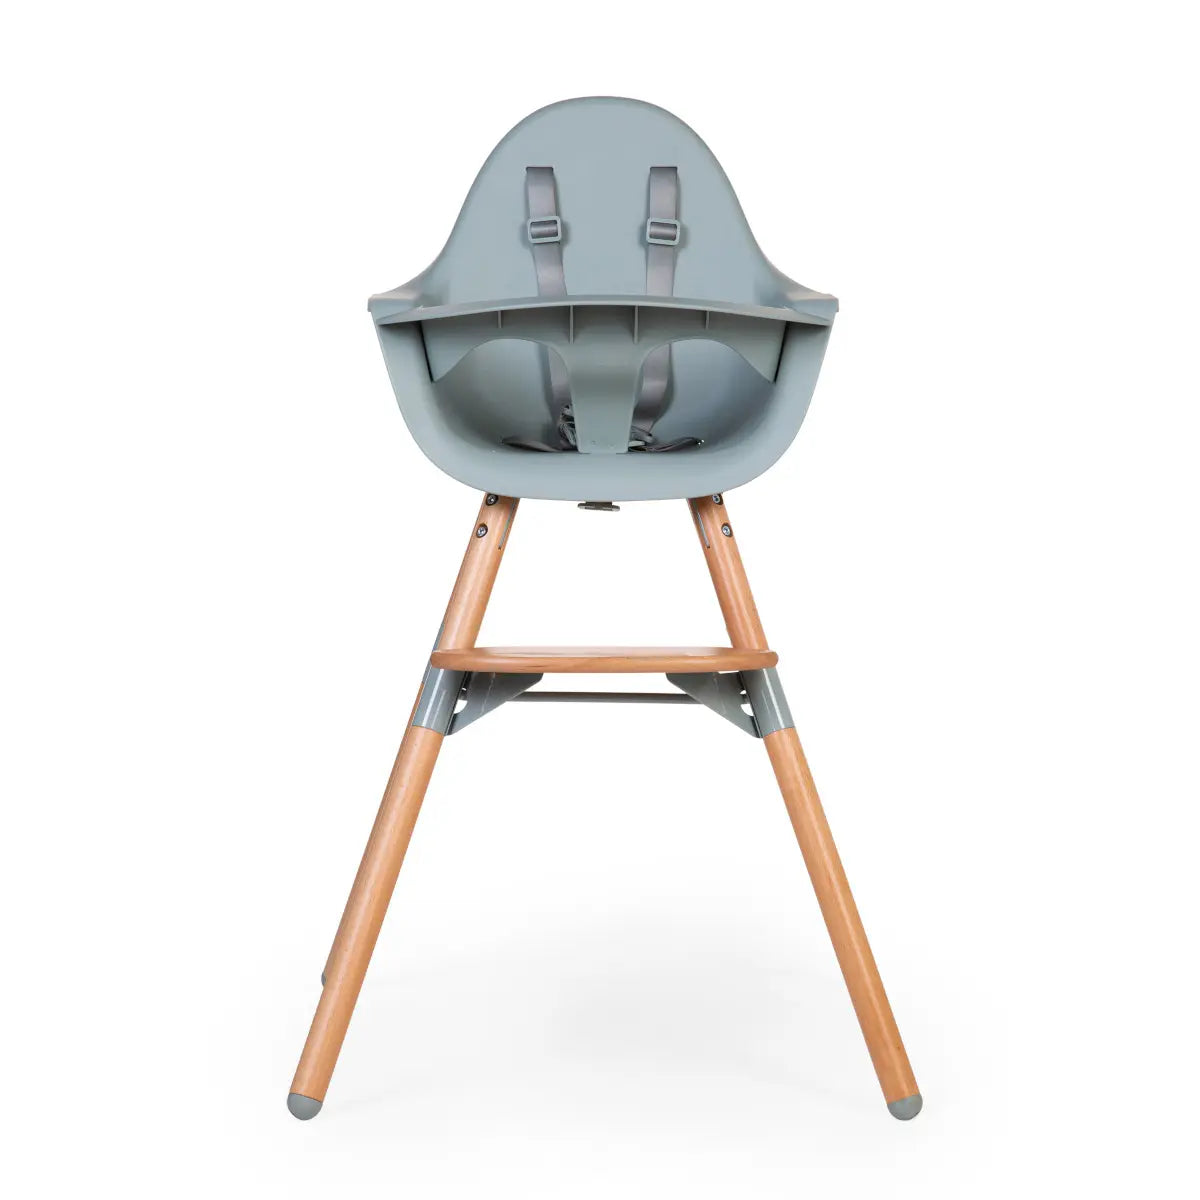 Childhome Evolu 2 High Chair Mint With FREE Tray EX DEMO Local Pick Up Only - Tiny Tots Baby Store 